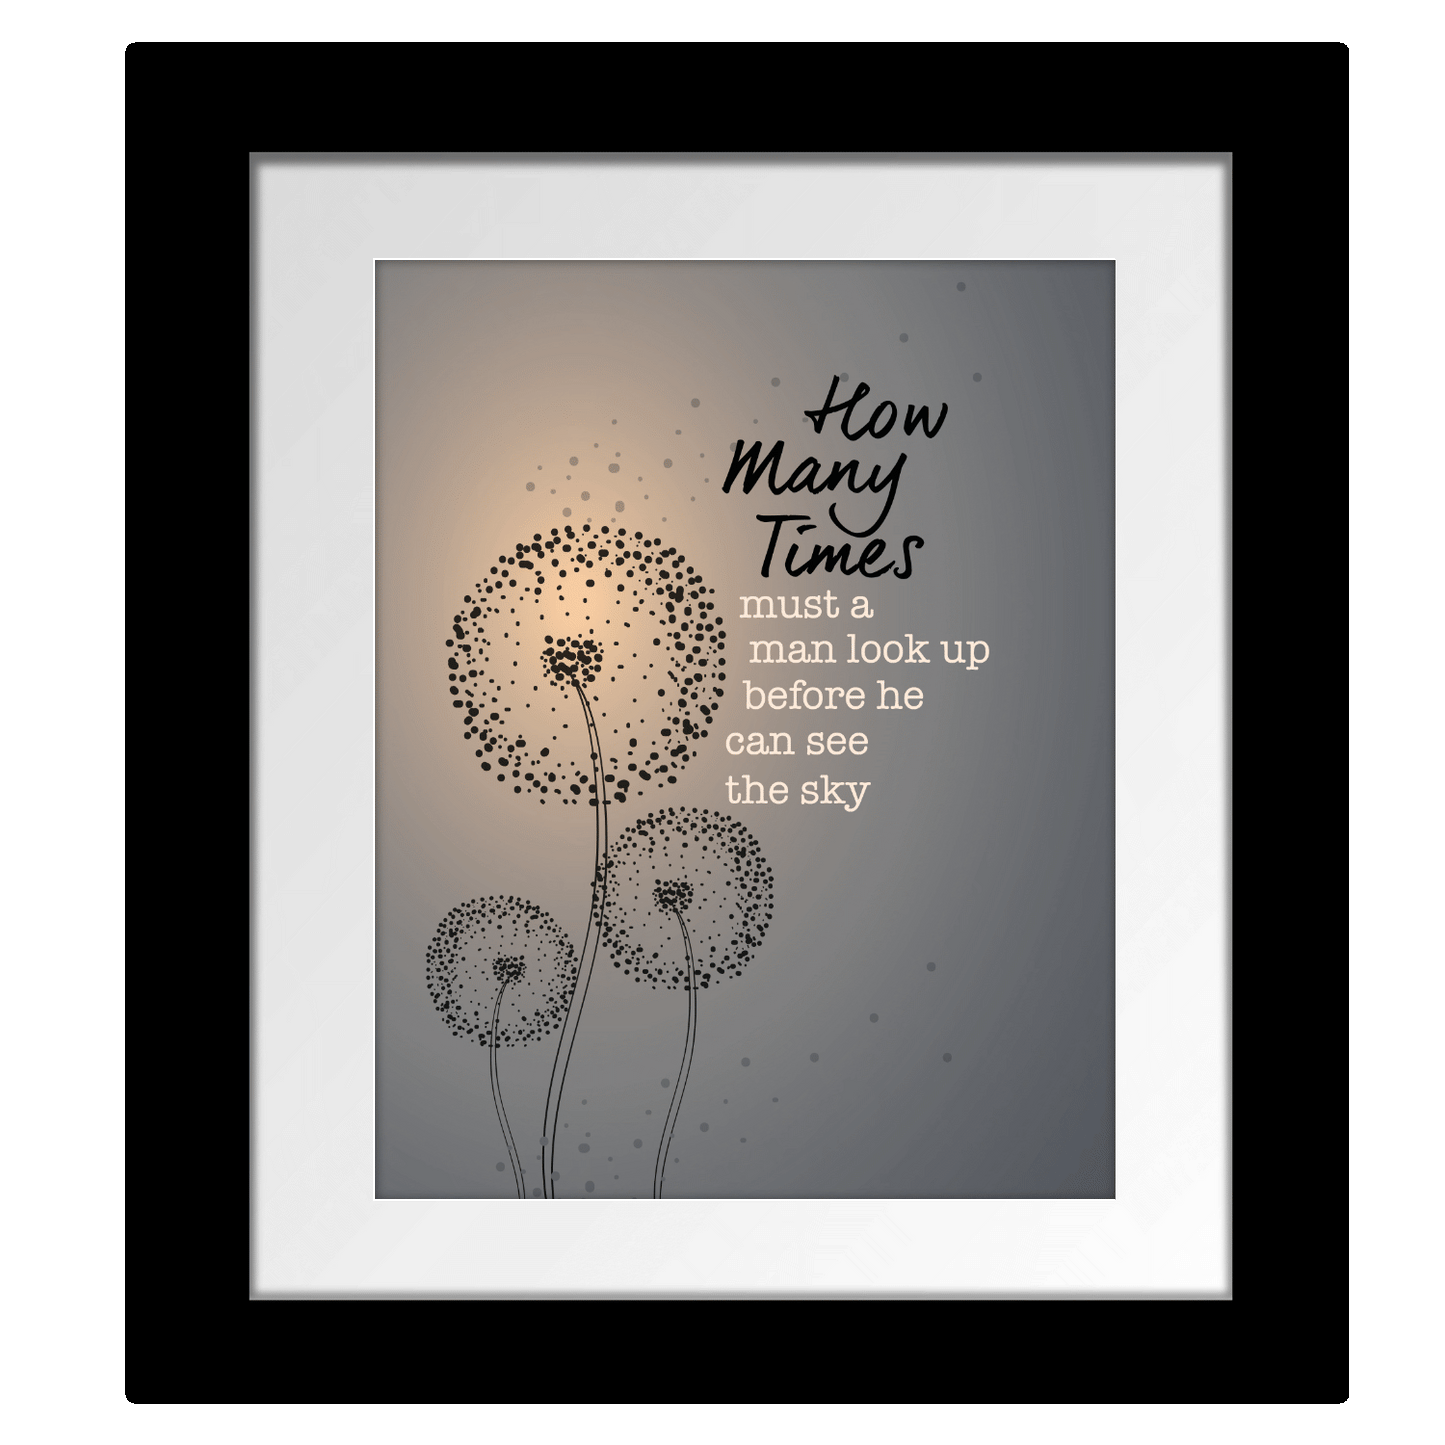 Blowin' in the Wind by Bob Dylan - Music Song Lyric Wall Art